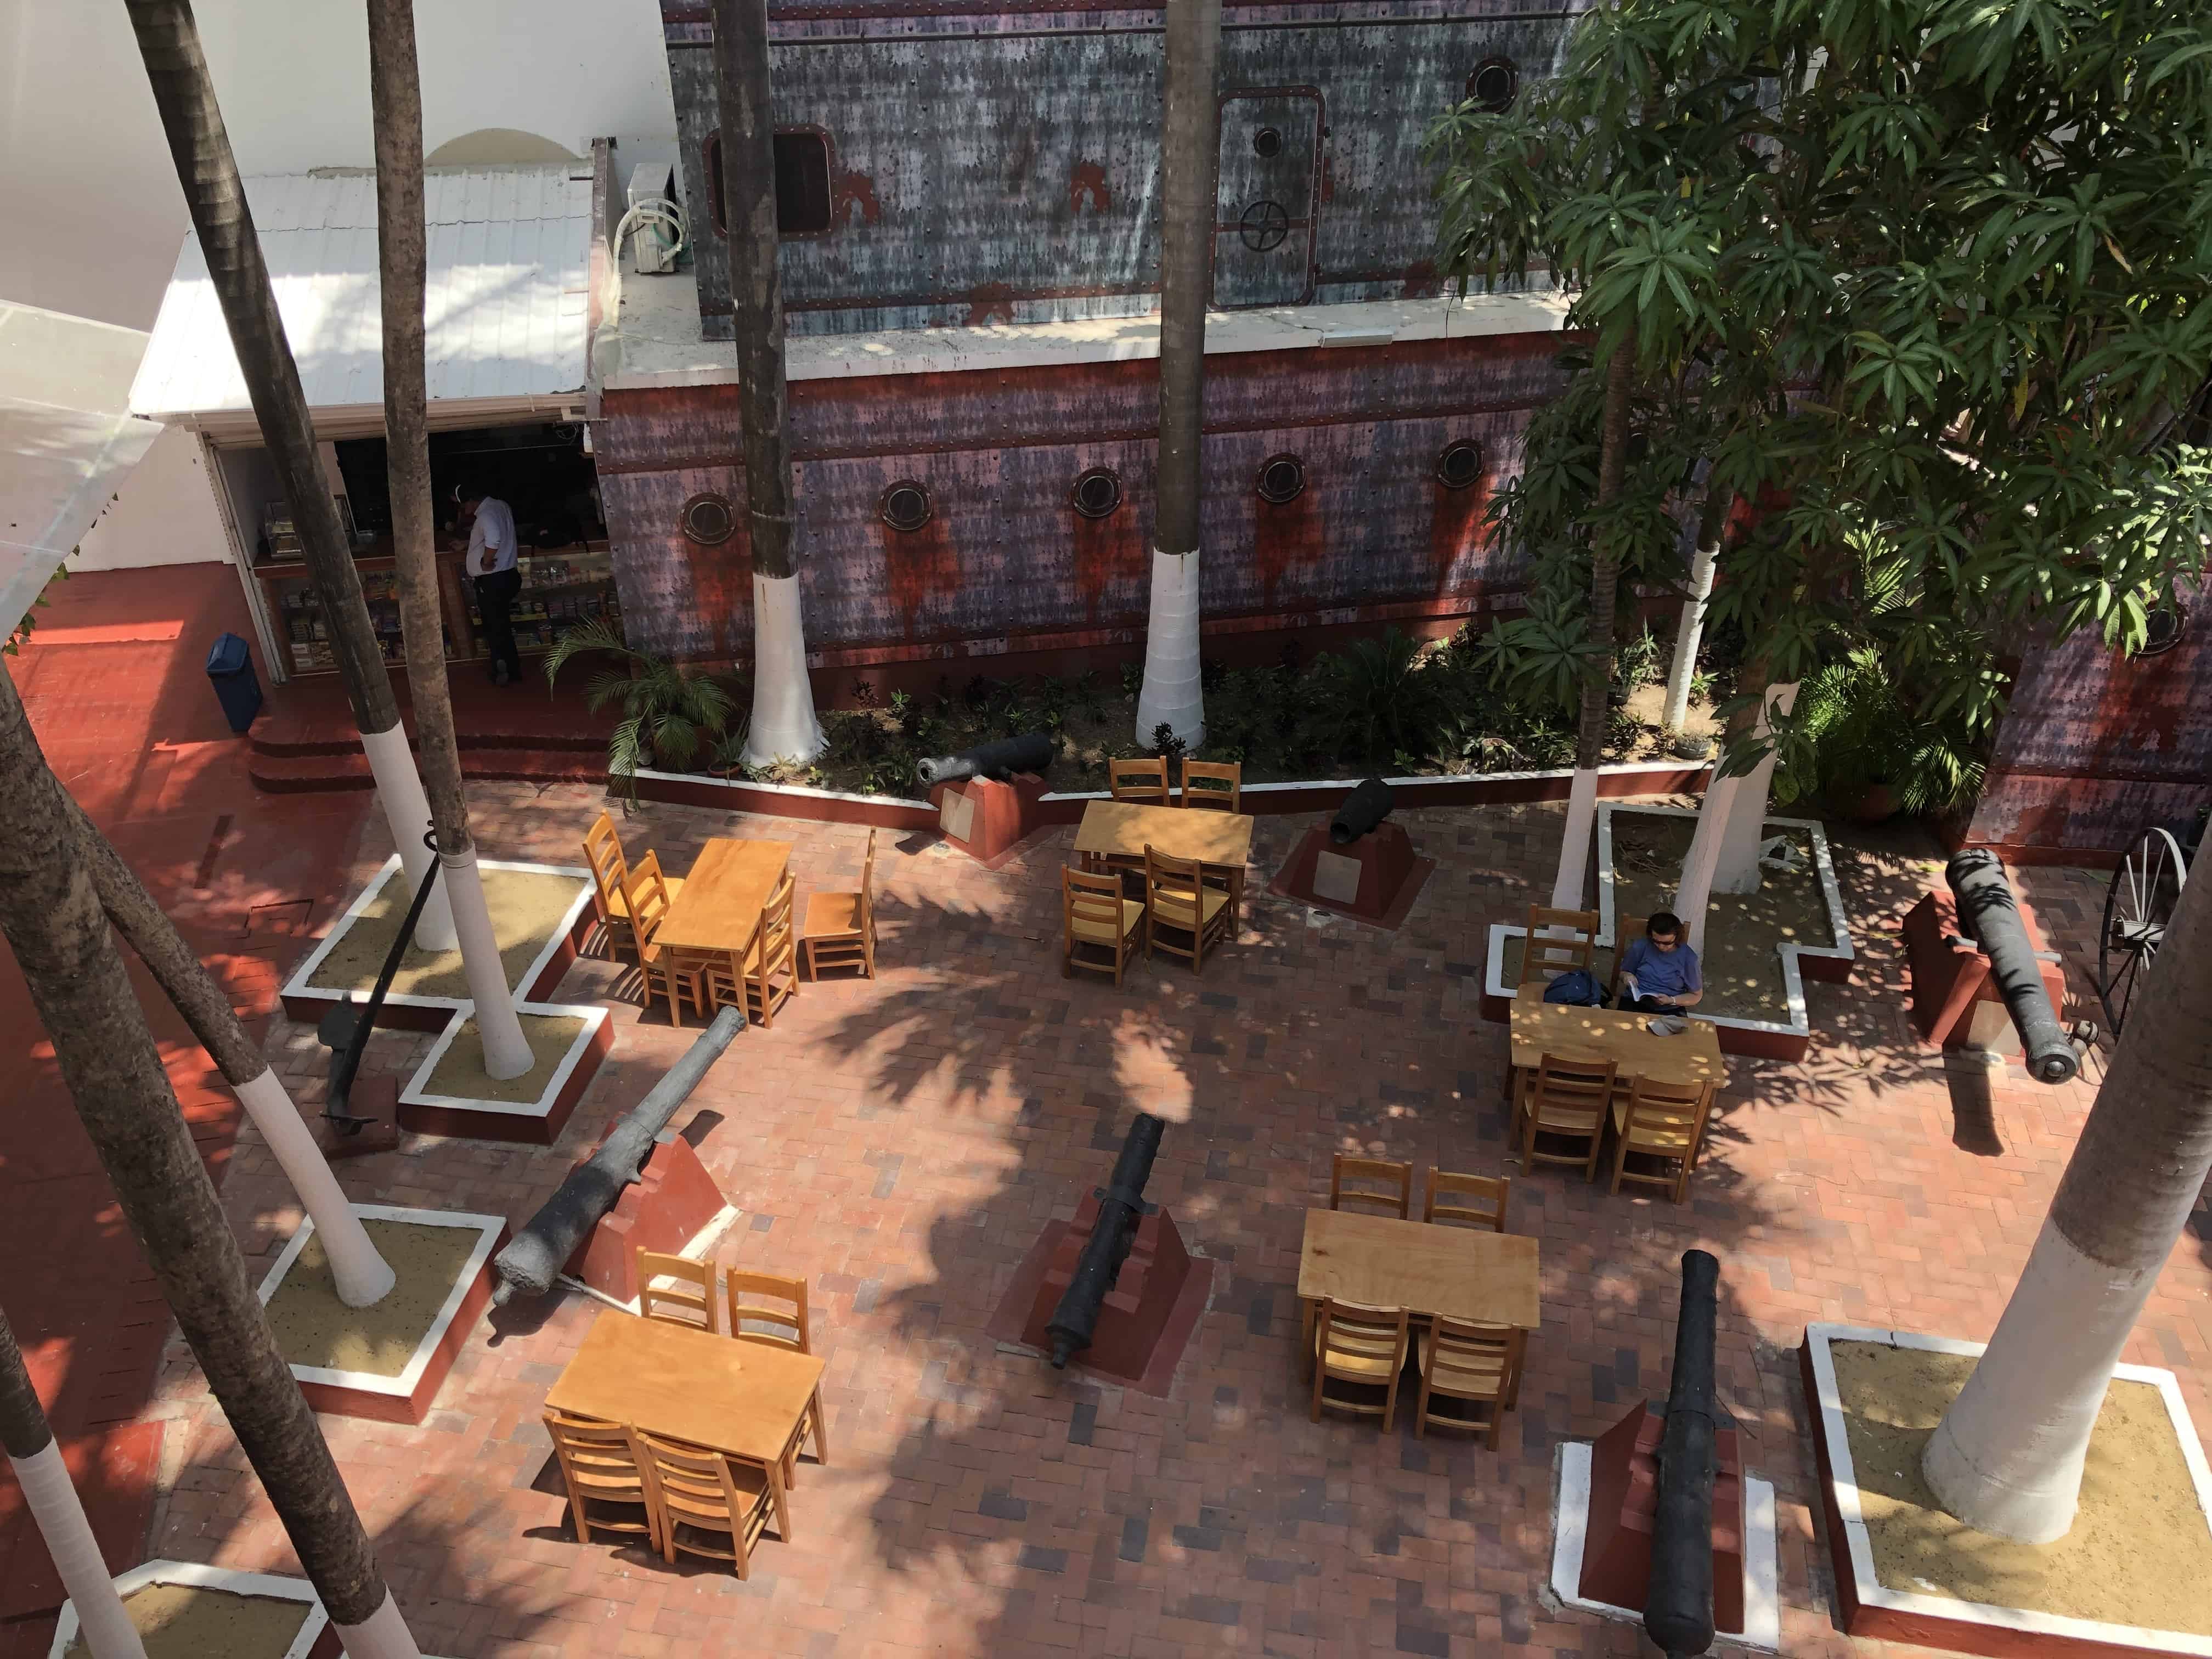 Looking down at one of the courtyards at the Caribbean Naval Museum in Cartagena, Colombia